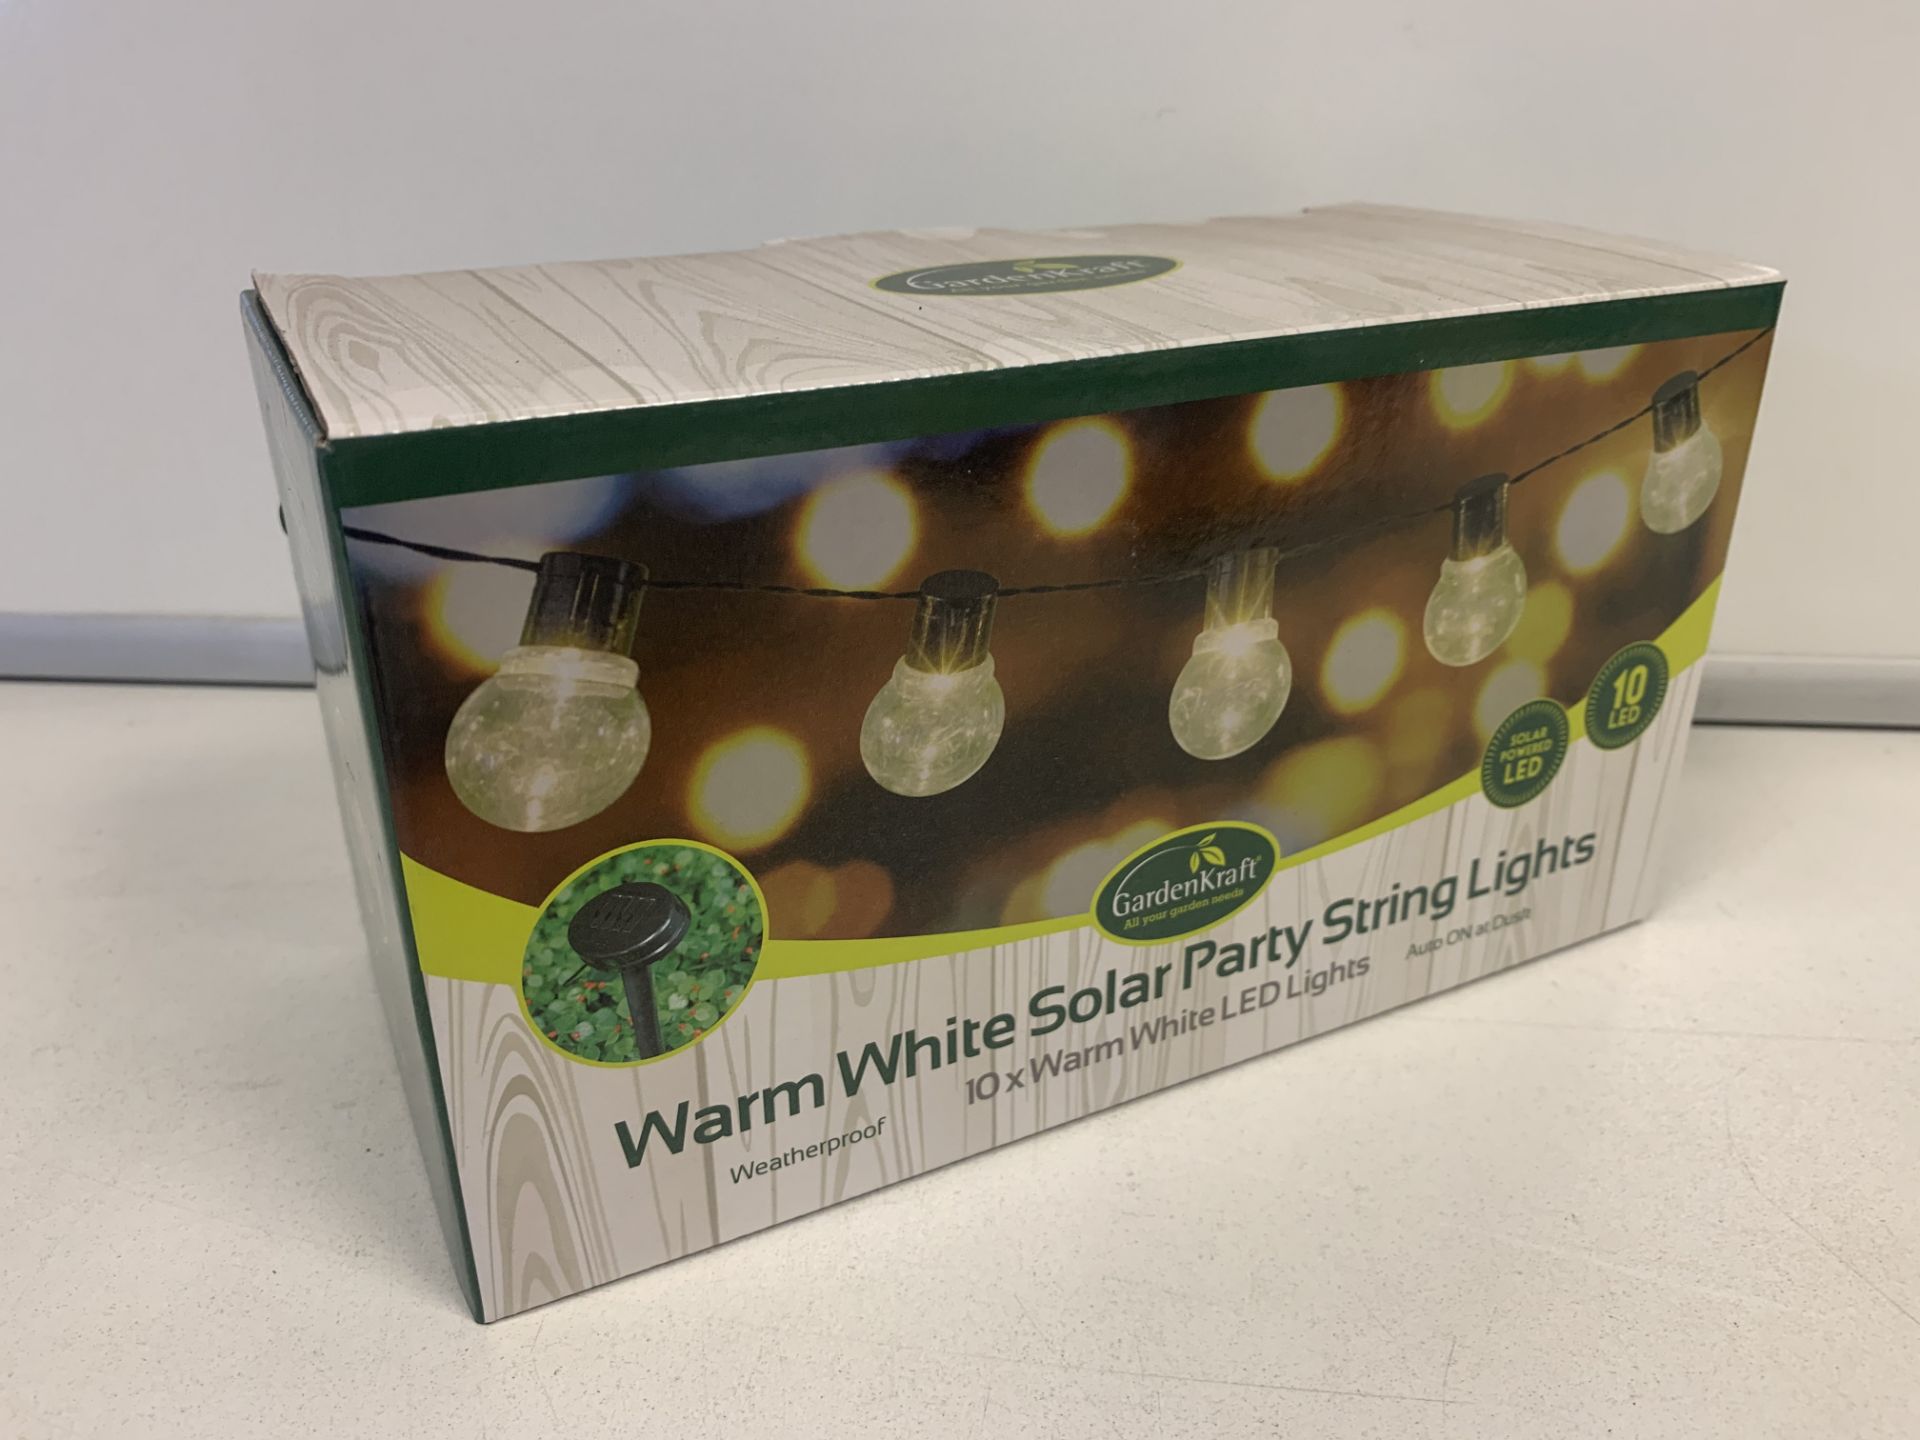 24 X BRAND NEW BOXED GARDENKRAFT WARM WHITE SOLAR PARTY STRING LIGHTS IN 2 BOXES